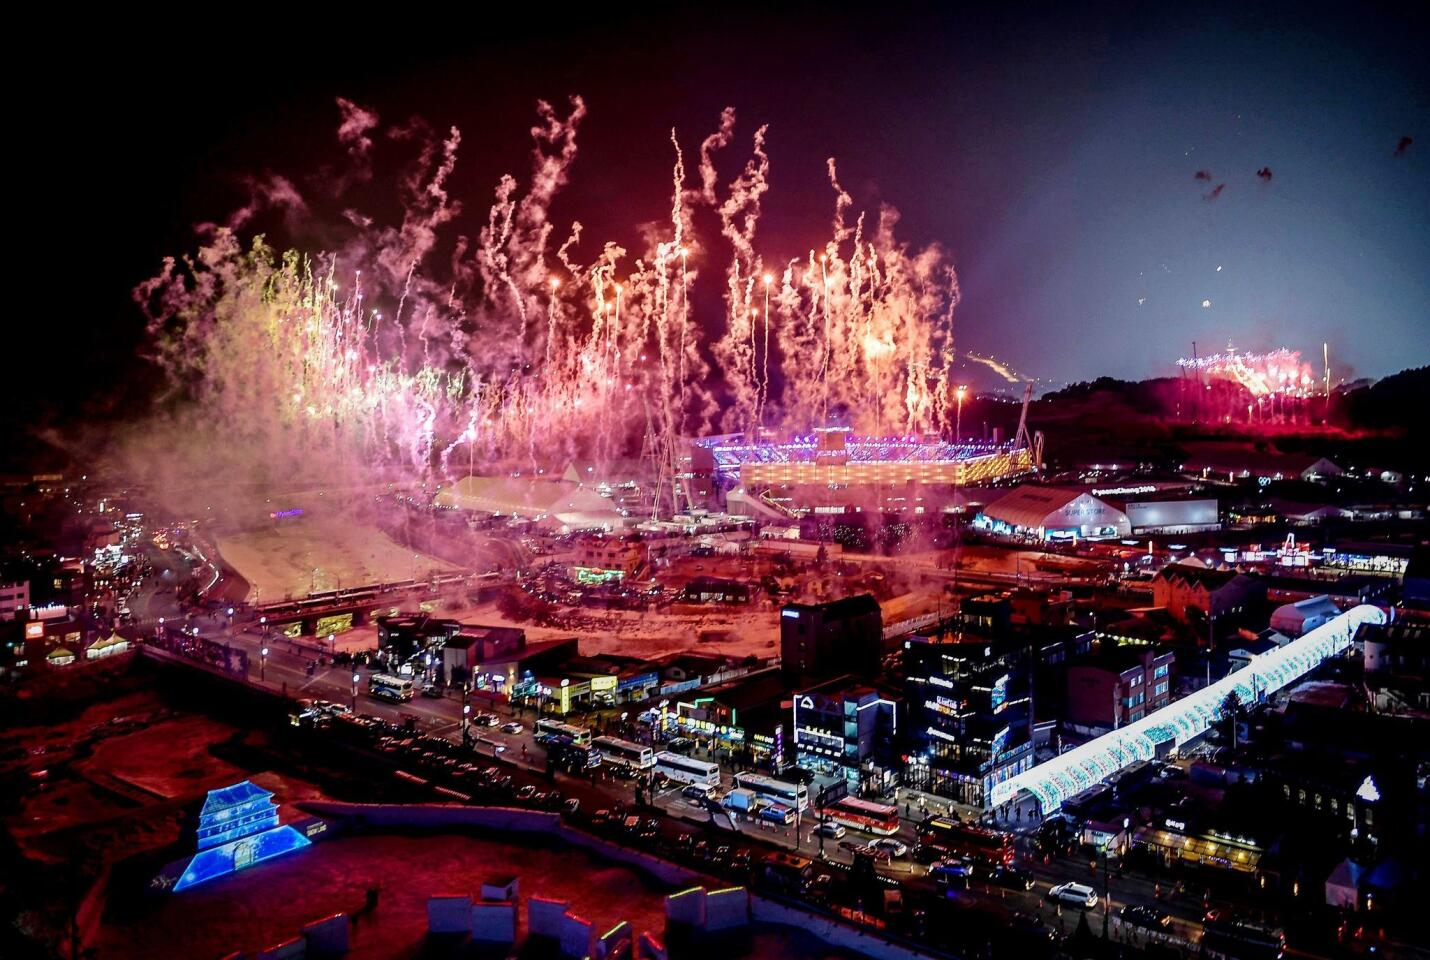 Fireworks go off at the start of the opening ceremony of the Pyeongchang 2018 Winter Olympic Games at the Pyeongchang Stadium.